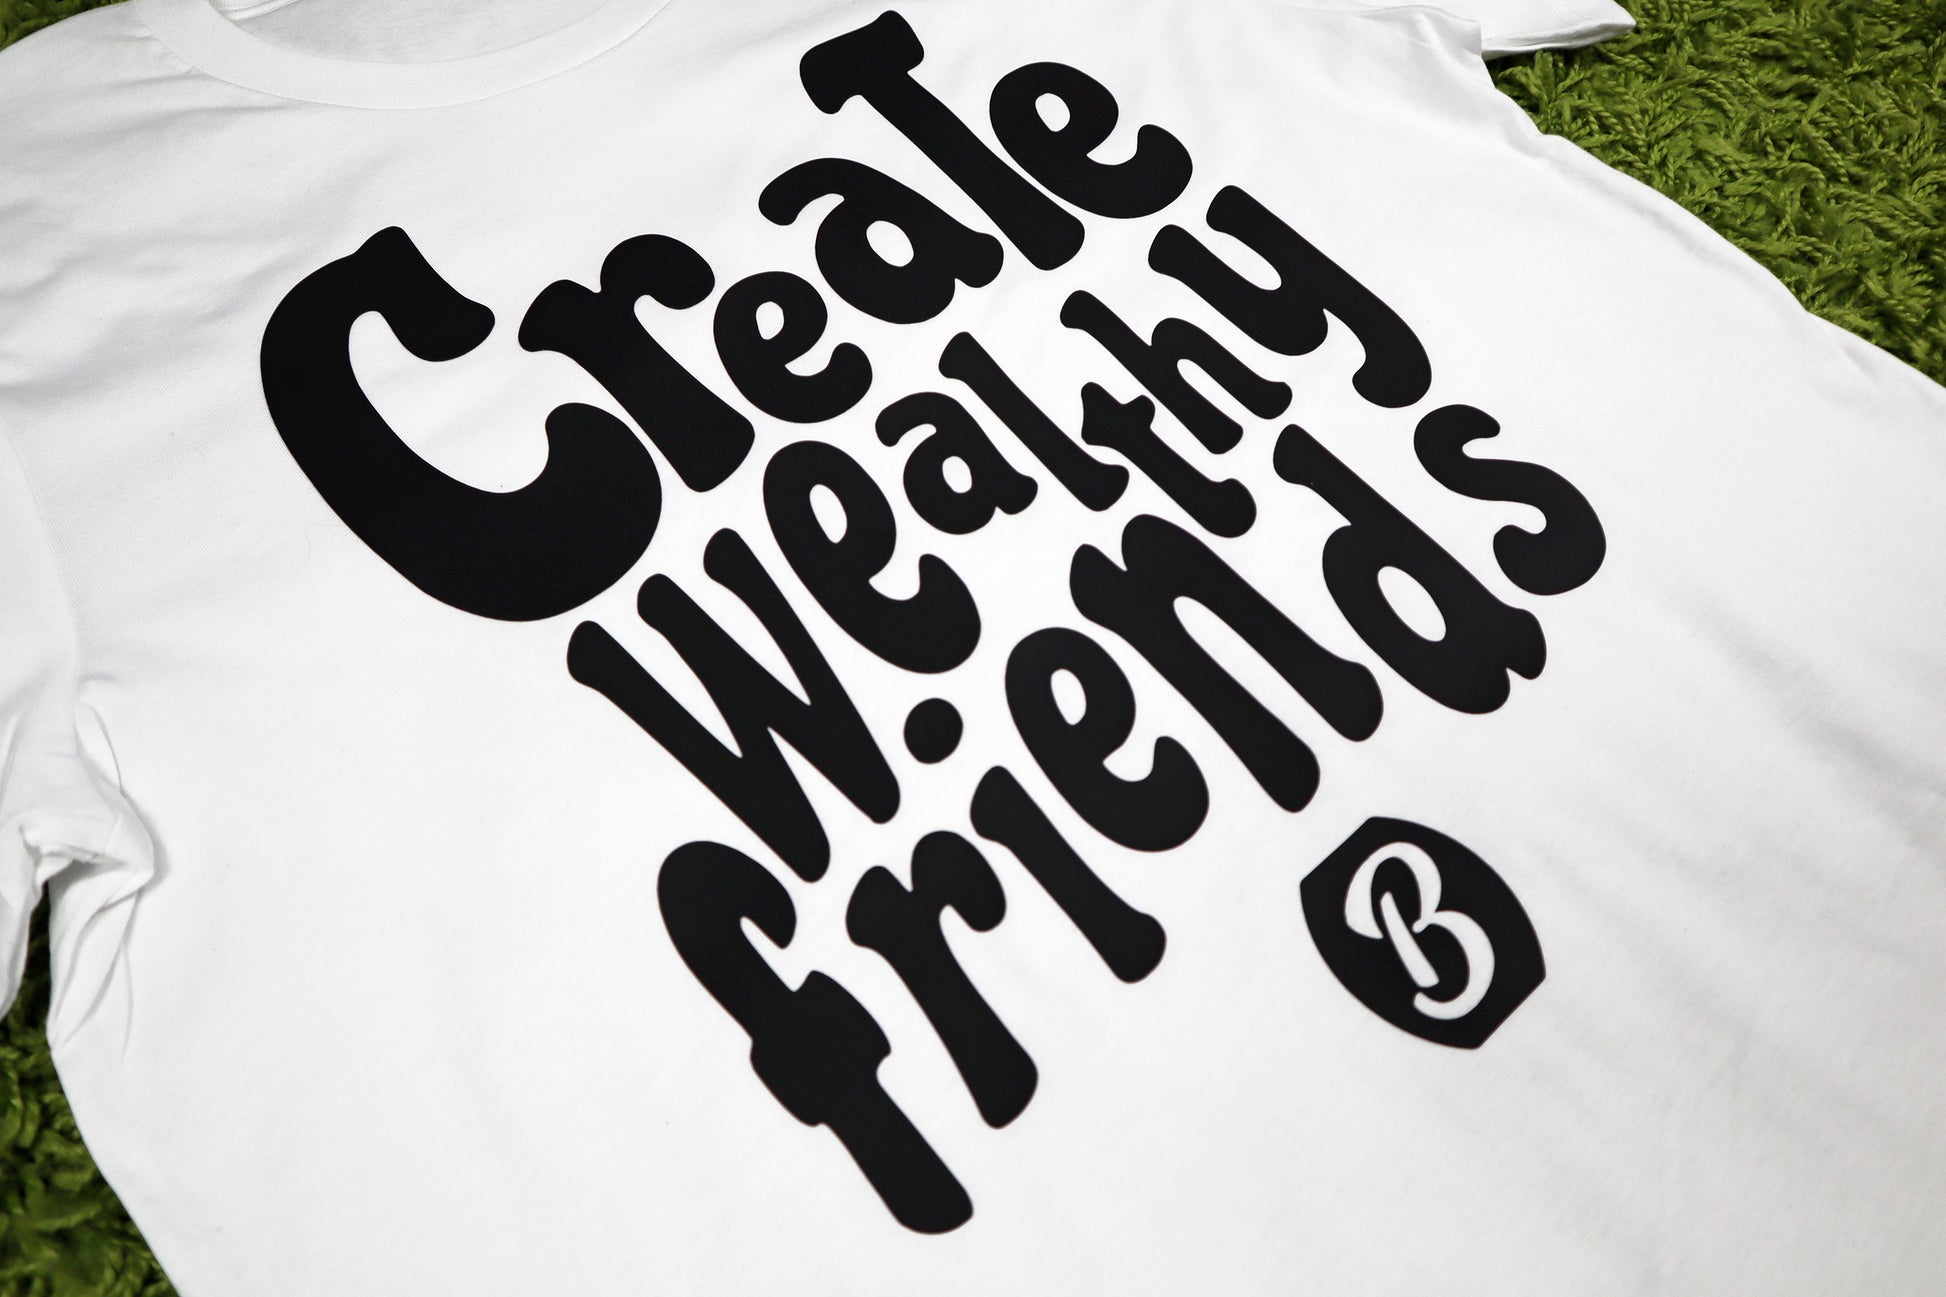 Barely "Create Wealthy Friends" Tee (Wht/Blk) - Barely Ordinary